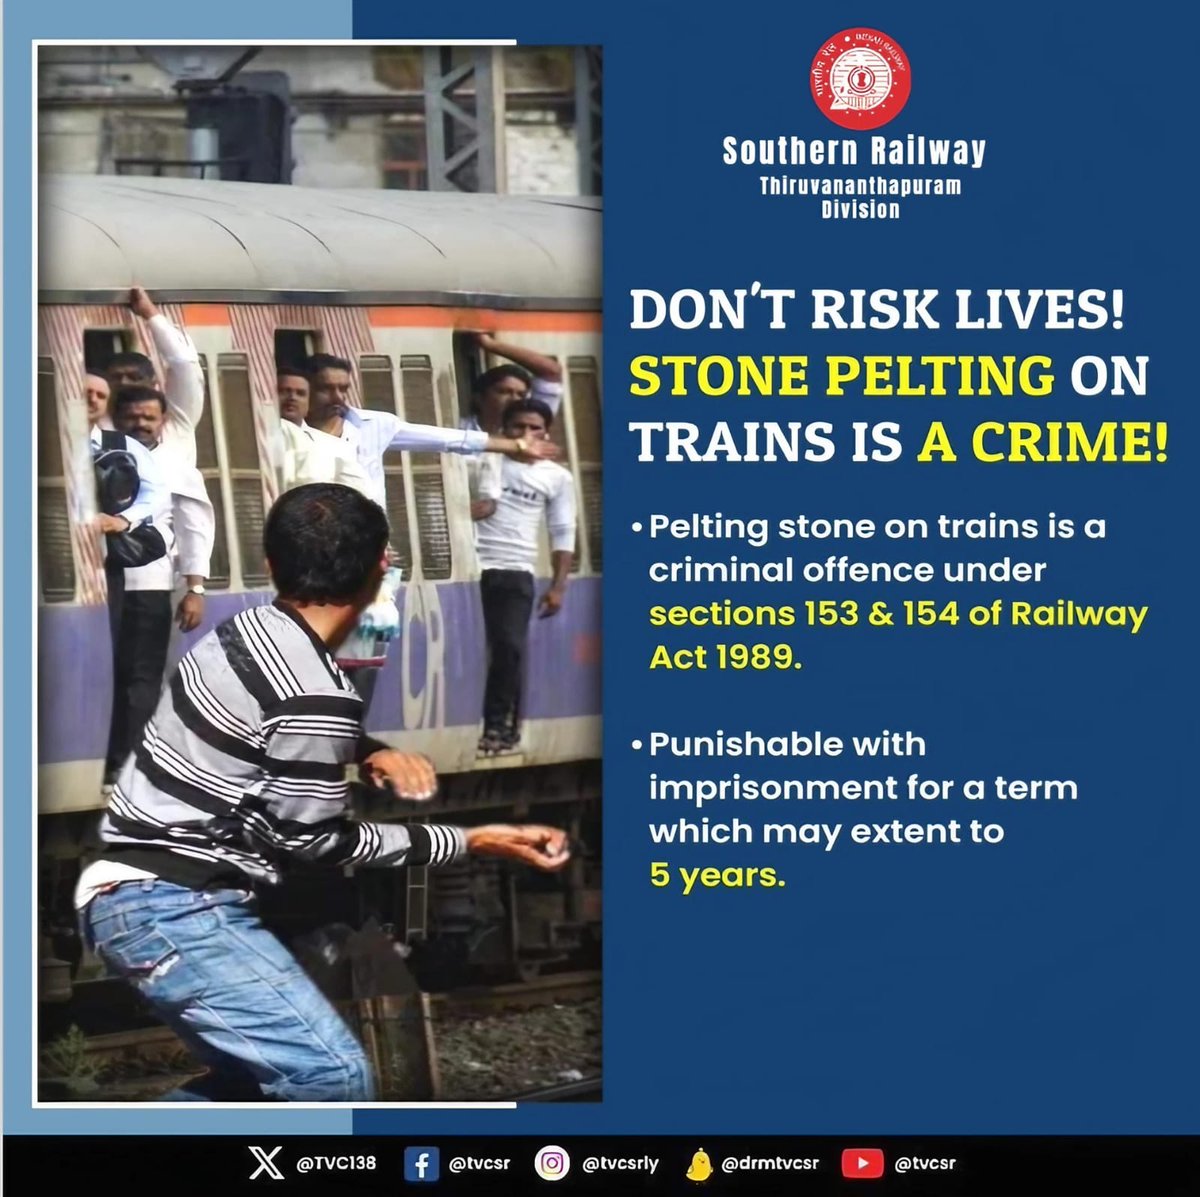 Stone-throwing at trains is a significant criminal offense, with penalties of up to five years in prison under Section 153 of Railway Act. Passenger safety and railway integrity are crucial. Let's commit to these priorities. 

#RailwaySafety #ZeroTolerance #SouthernRailway